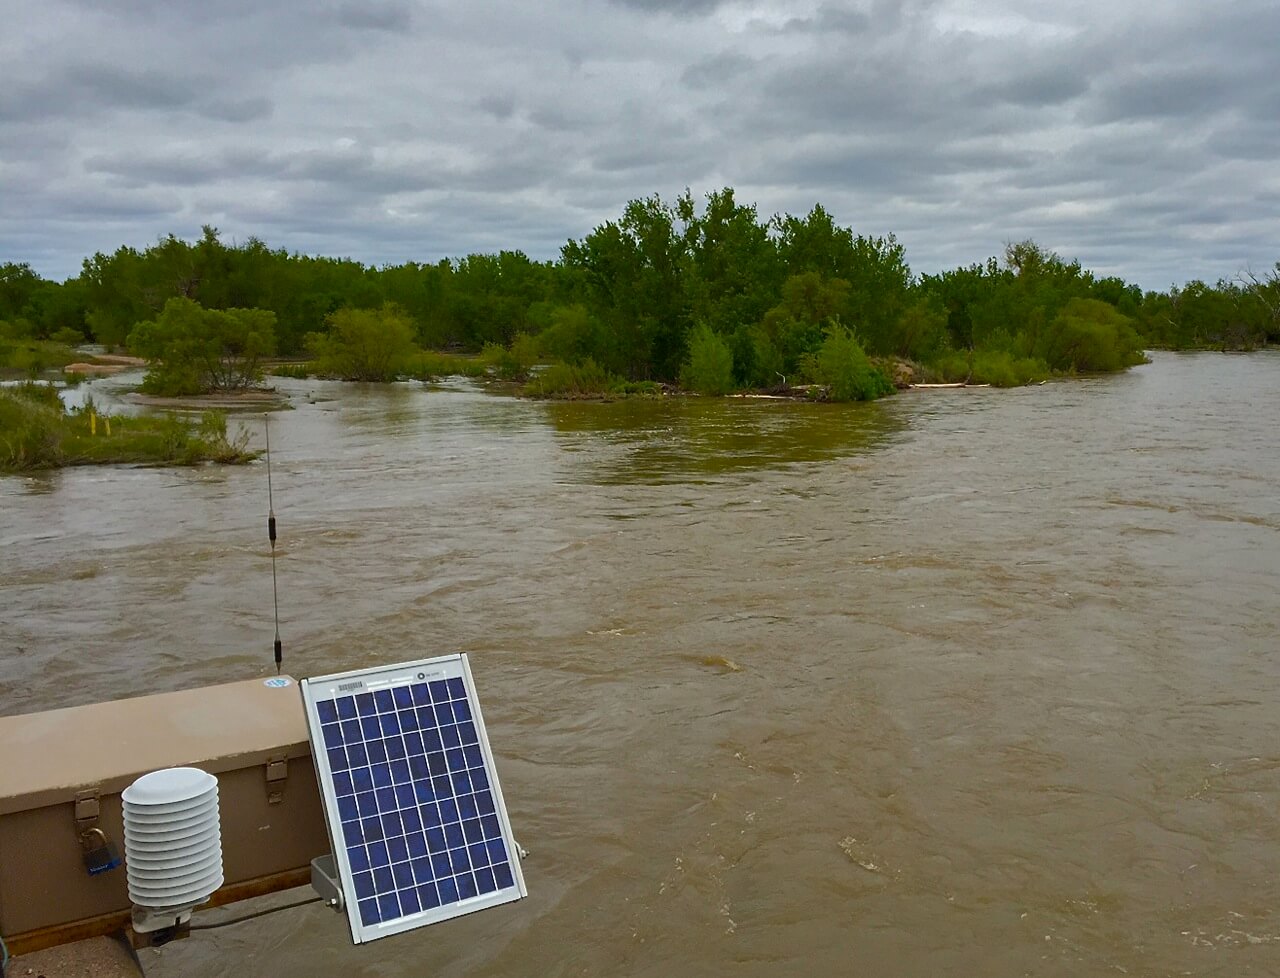 Solar-powered instruments measure the South Platte River's flows near Julesberg, just before it flows out of the state and into Nebraska. Consultants working on the Colorado water plan say the river could yield some extra supplies during wet years, and they're looking at ways to tap into that potential.